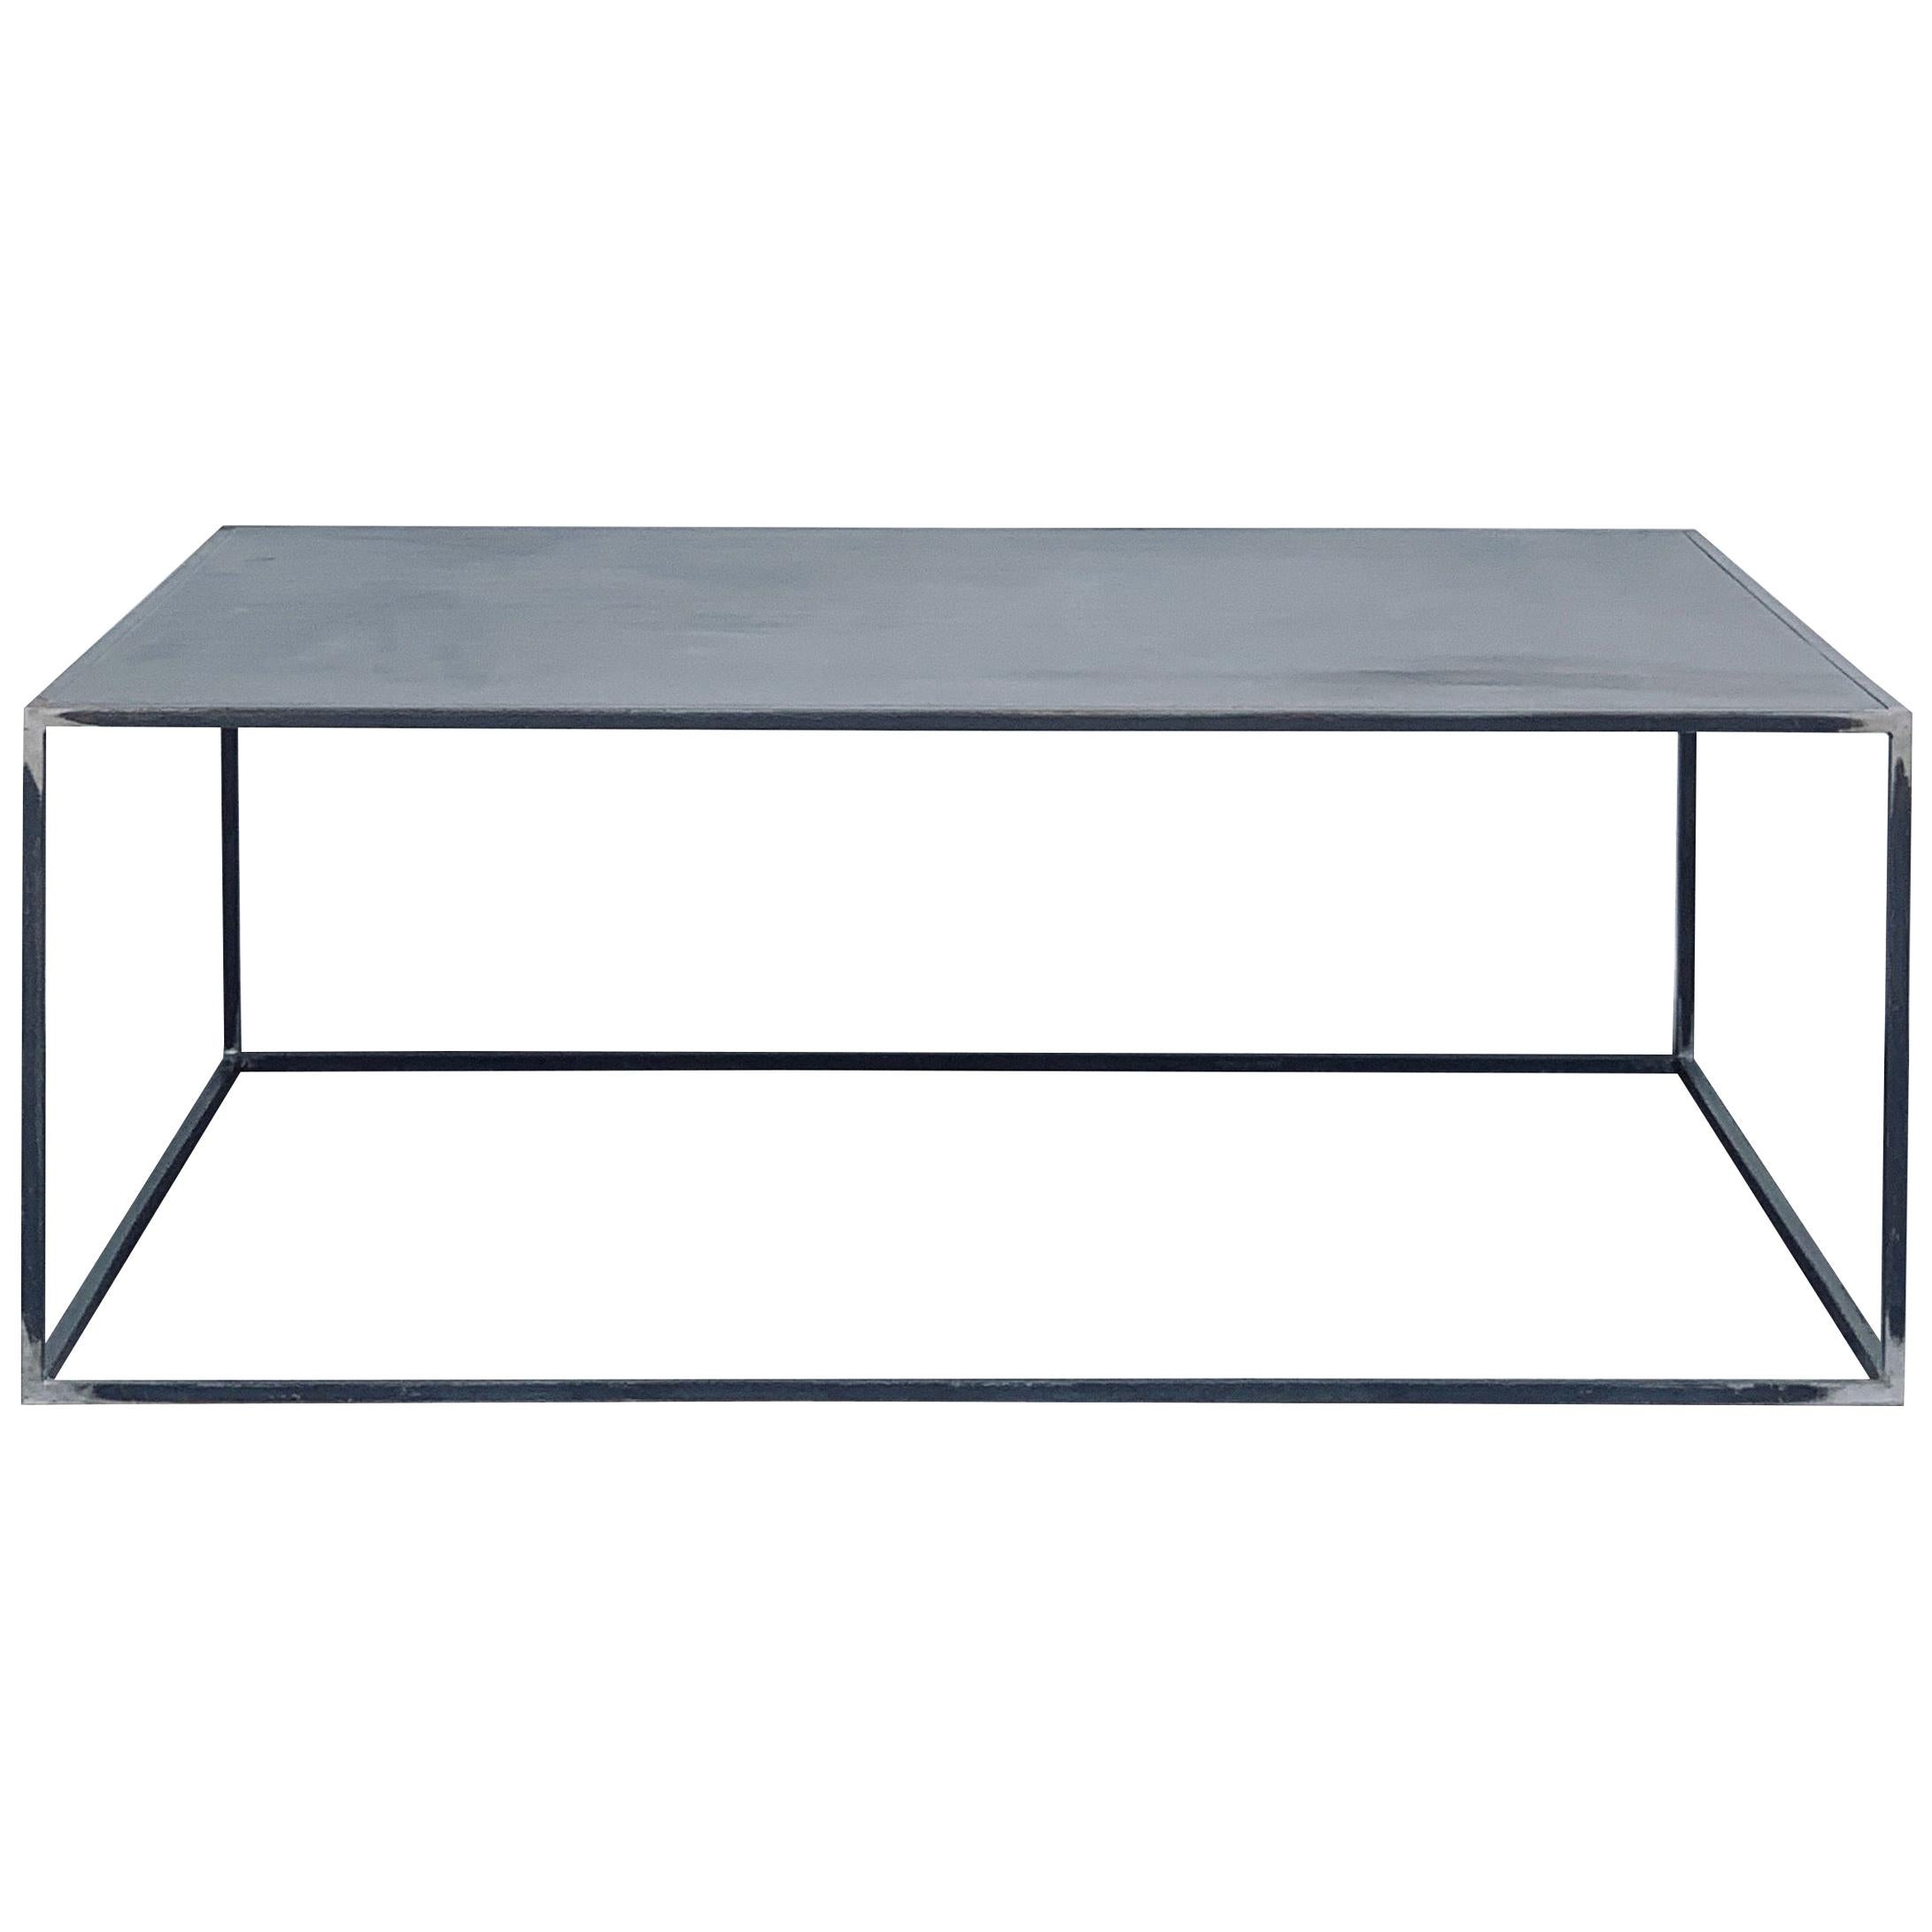 Huge Minimalist 'Filiforme' Patinated Steel Coffee Table by Design Frères For Sale